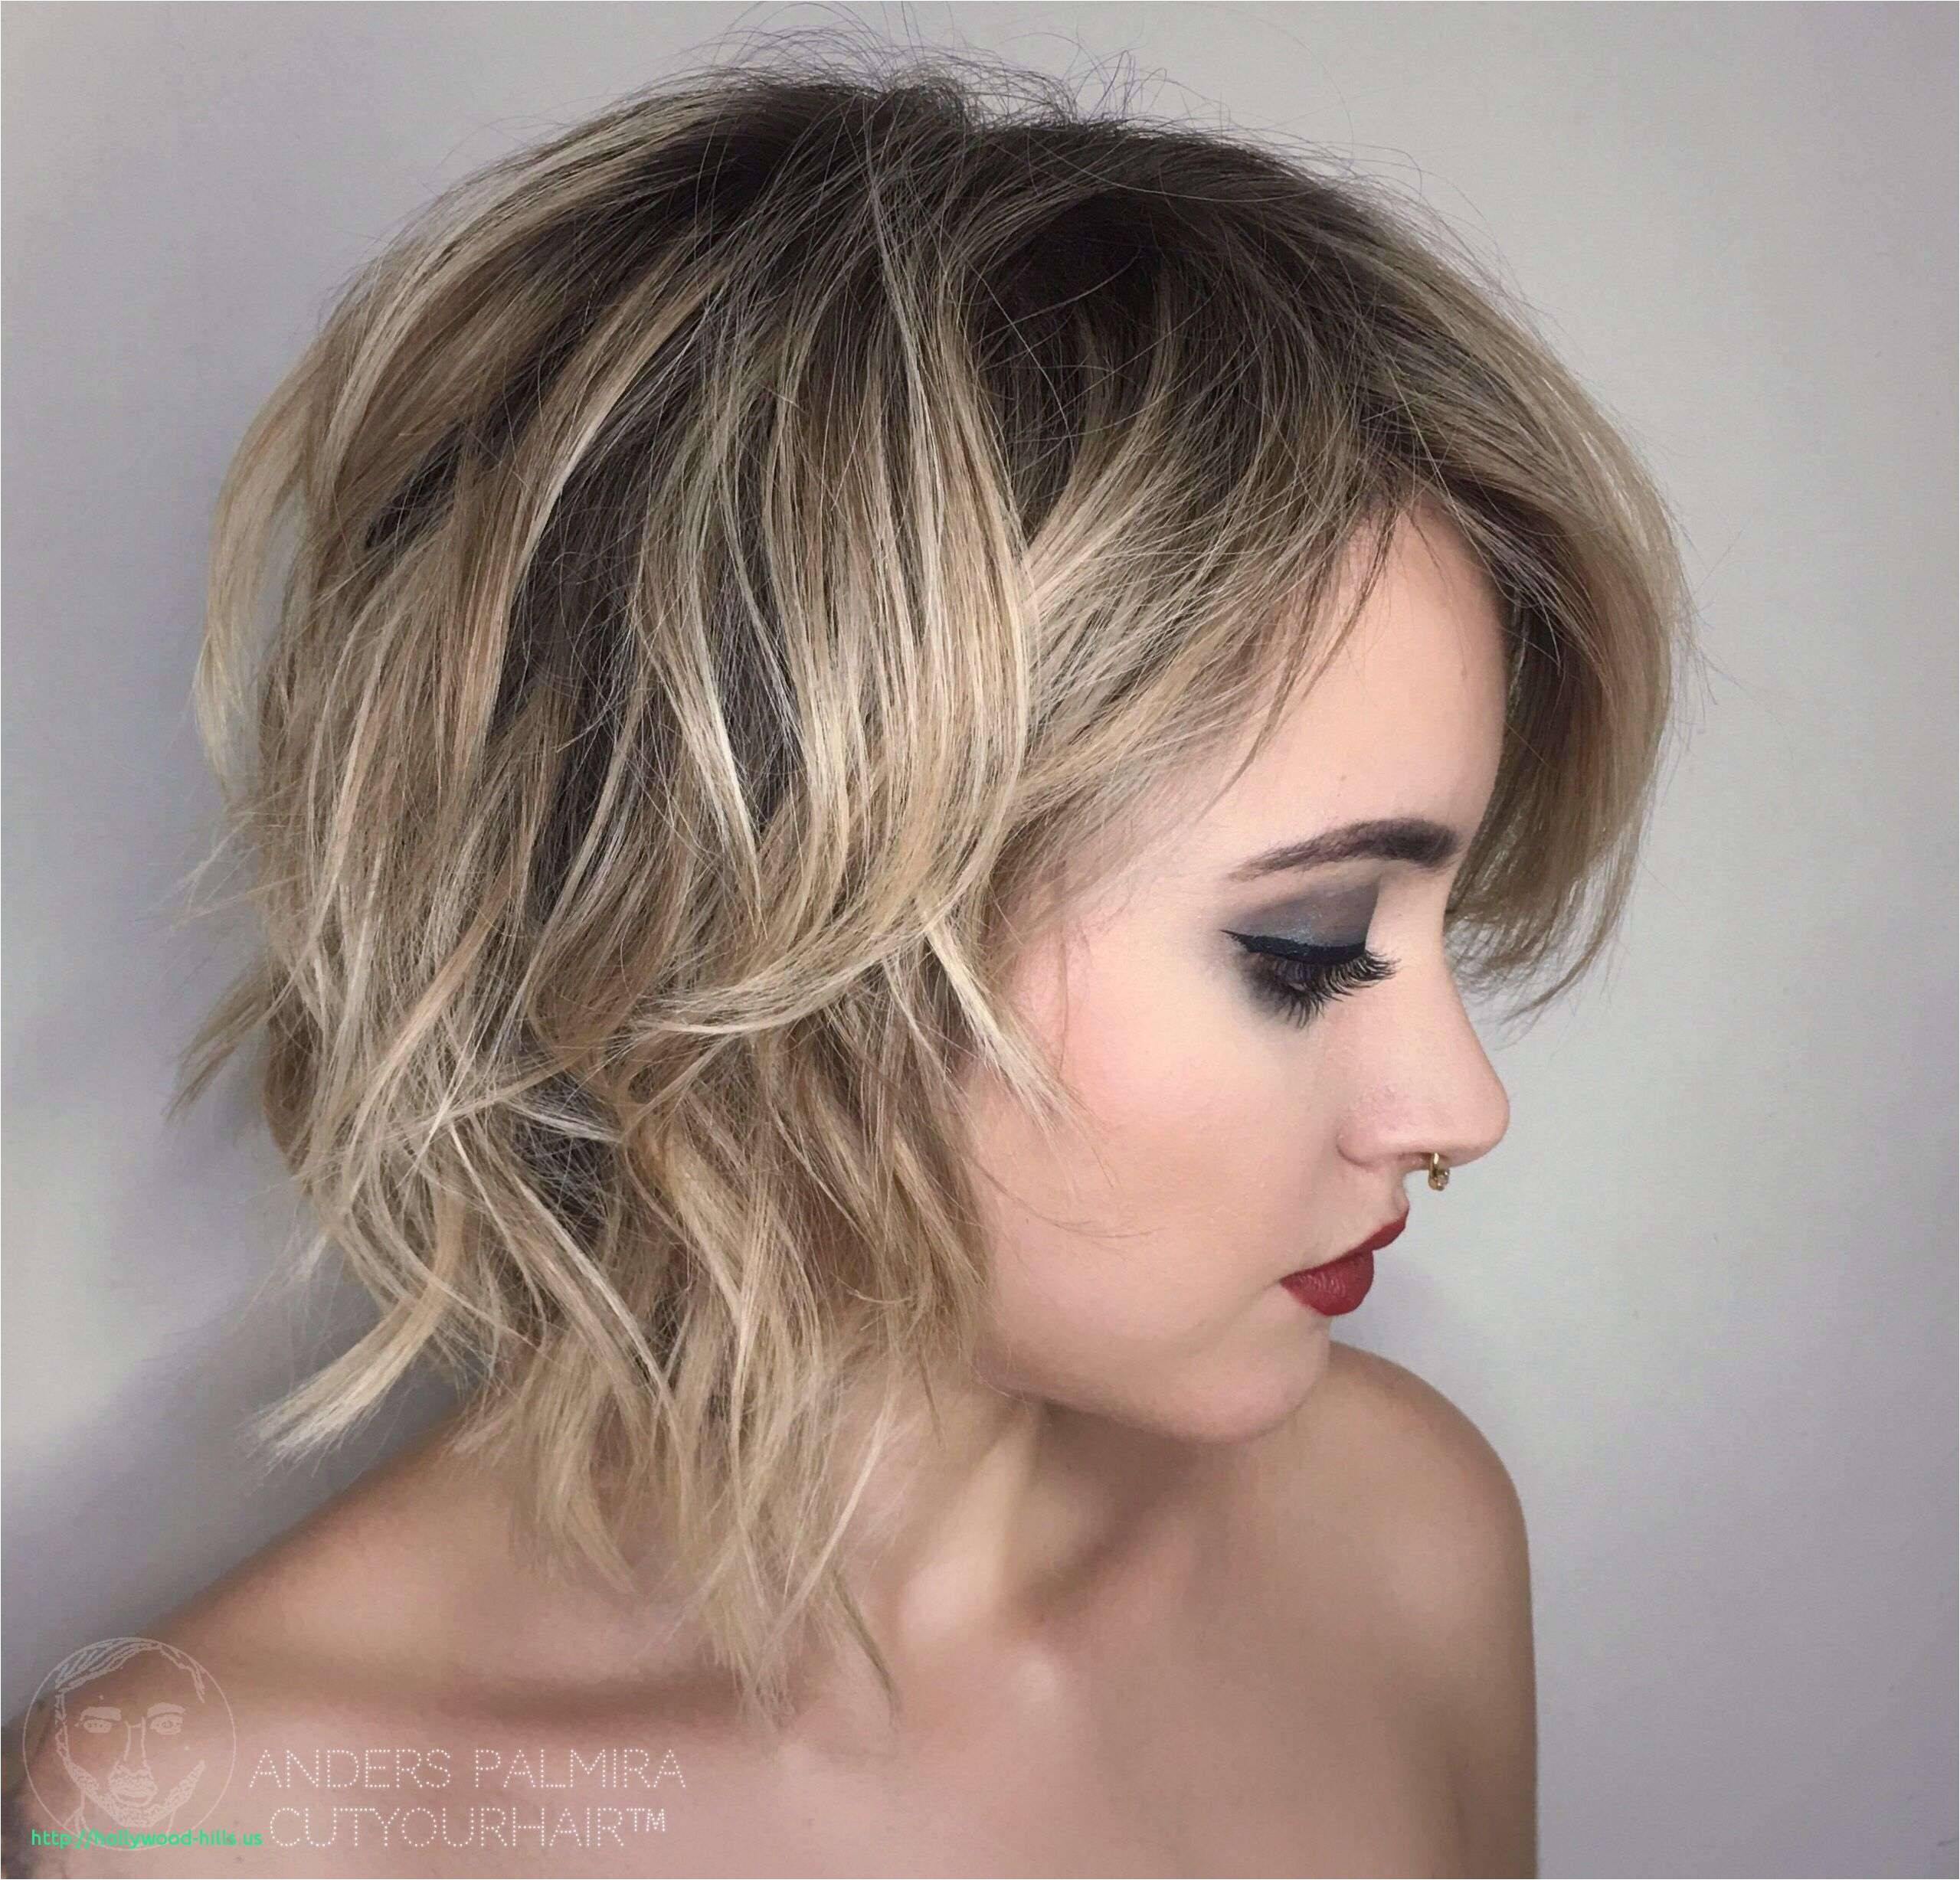 Medium Long Layered Hairstyles Elegant Layered Hairstyles for Fine Hair Best I Pinimg 1200x 0d